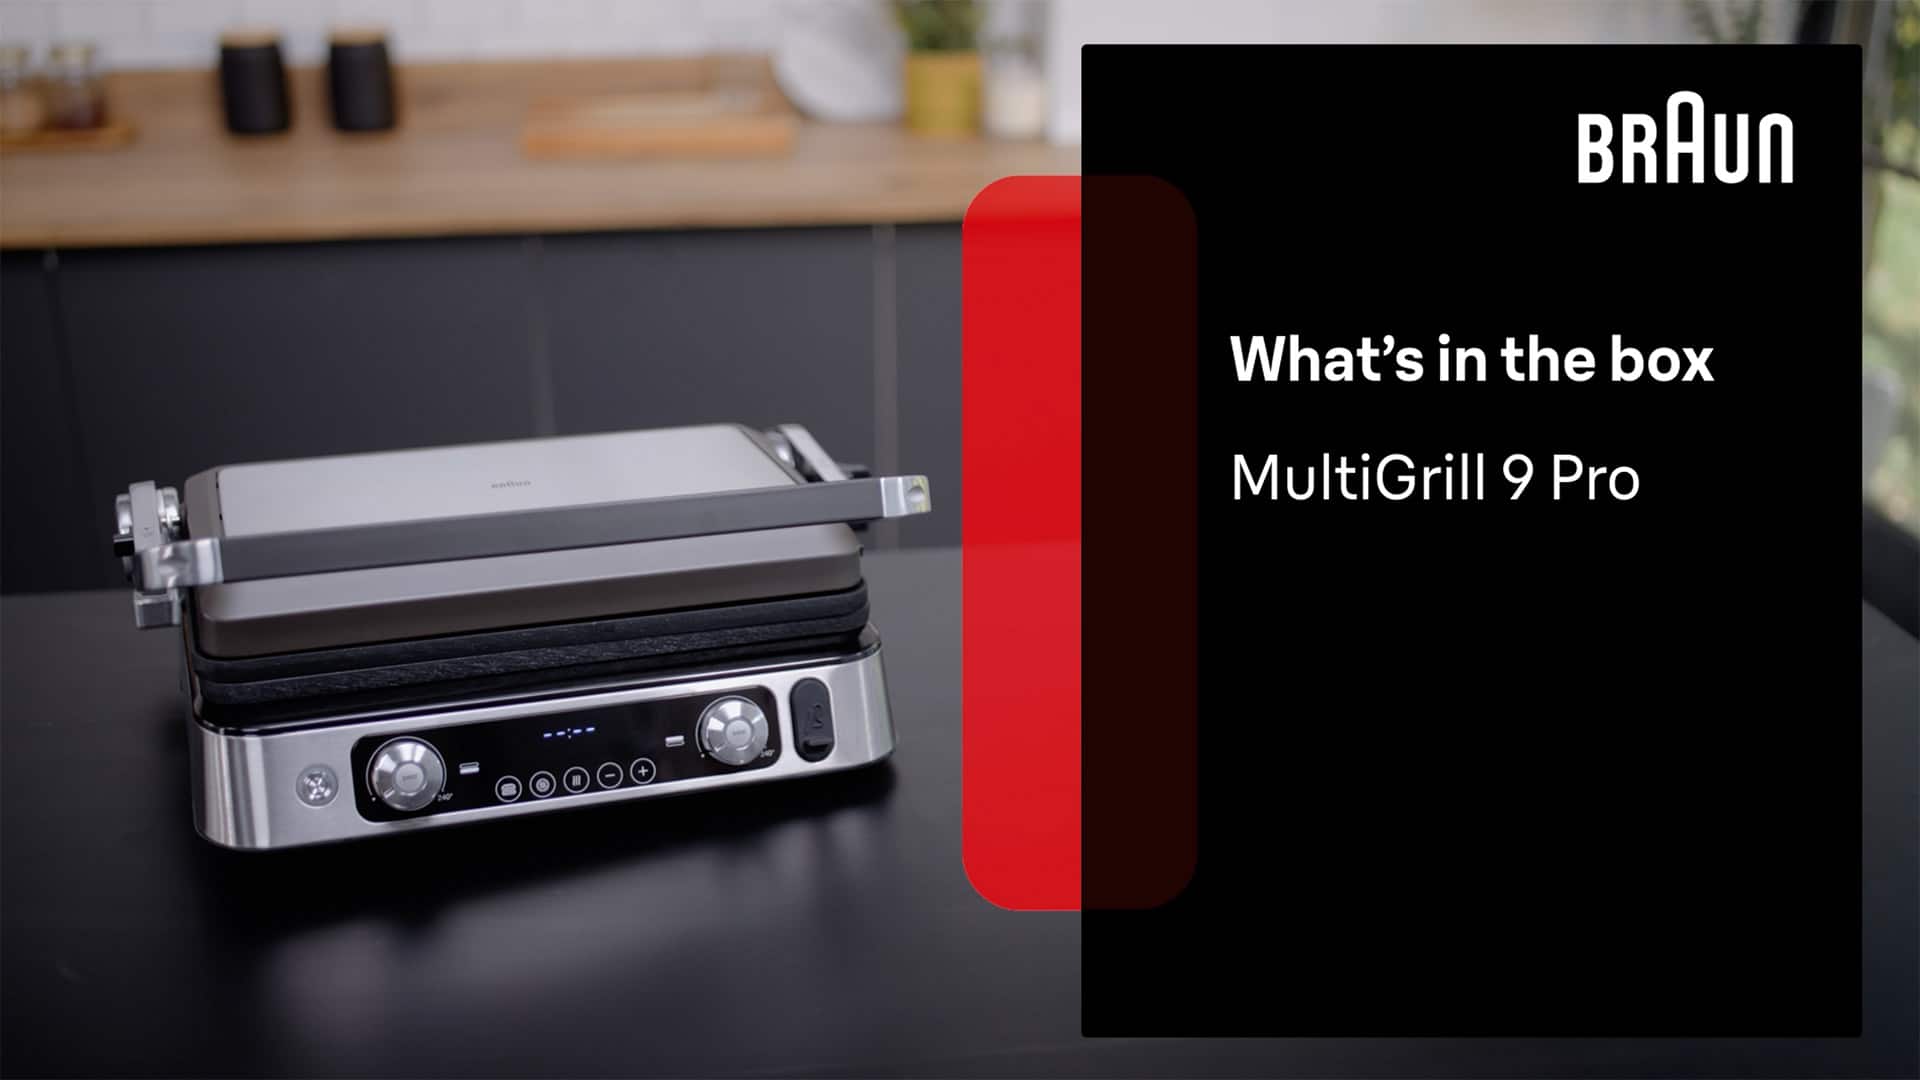 Braun MultiGrill 9 Pro | What's in the Box